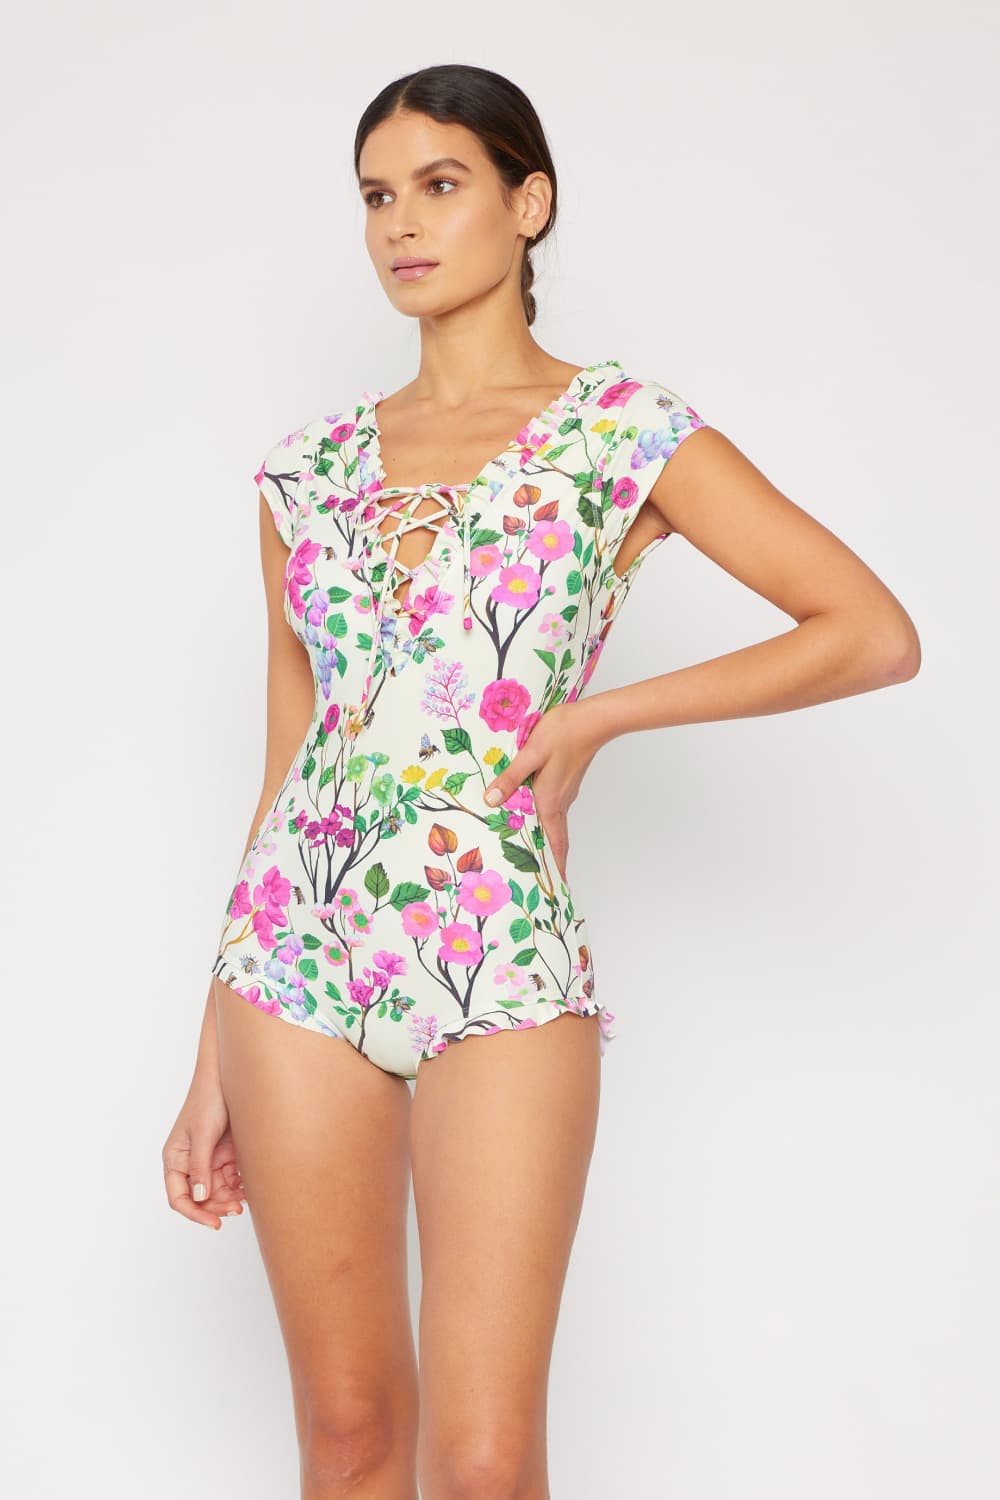 Bring Me Flowers V-Neck One Piece Swimsuit Cherry Blossom Cream - Kawaii Stop - Beach Fashion, Beach Goddess, Beachside Glamour, Cherry Blossom Print, Comfortable Fit, Fashionista Must-Have, Floral Elegance, Lace-Up Detail, Marina West Swim, One Piece Swimsuit, Pool Party Ready, Poolside Chic, Resort Ready, Ship from USA, Sophisticated Style, Stylish Swim, Swimwear Confidence, V-Neck Design, Vacation Essential, Versatile Swimwear, Women's Clothing